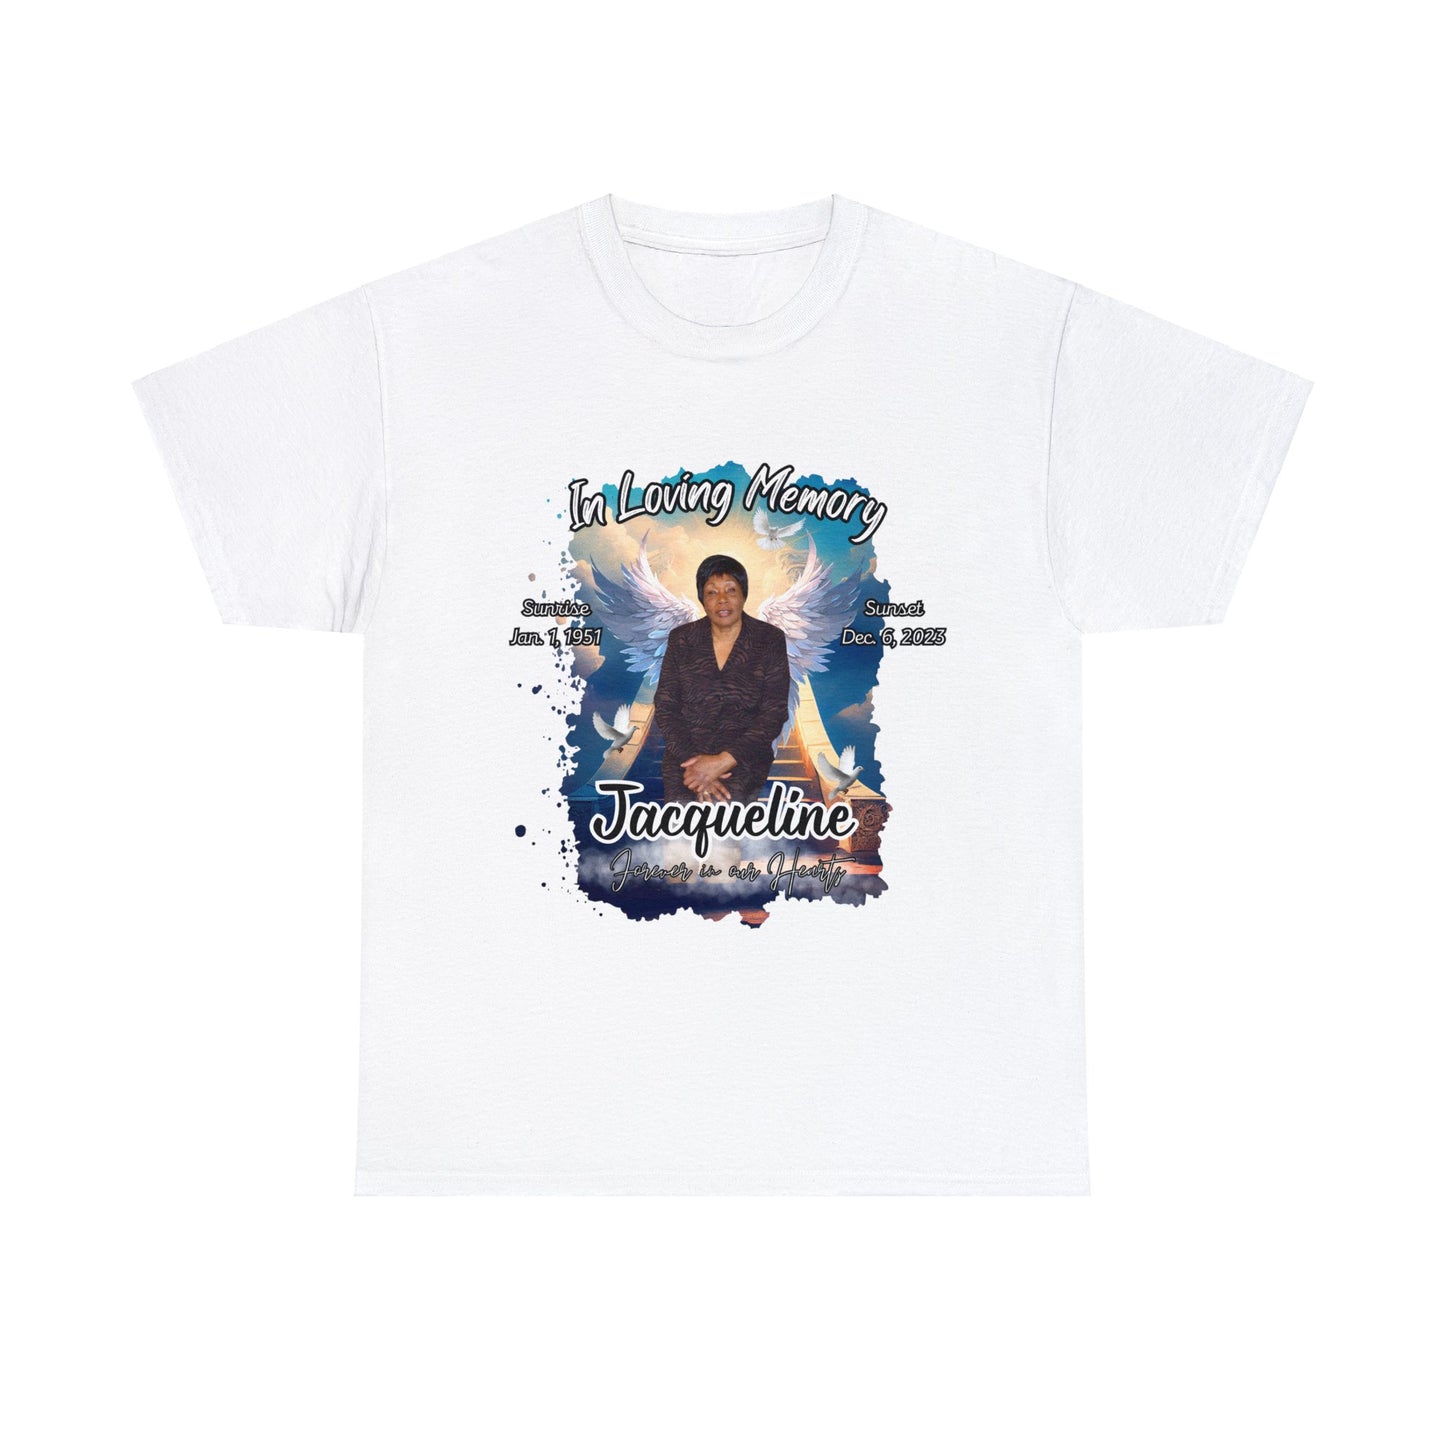 Jacqueline "Forever In Our Hearts" Memorial T-Shirt